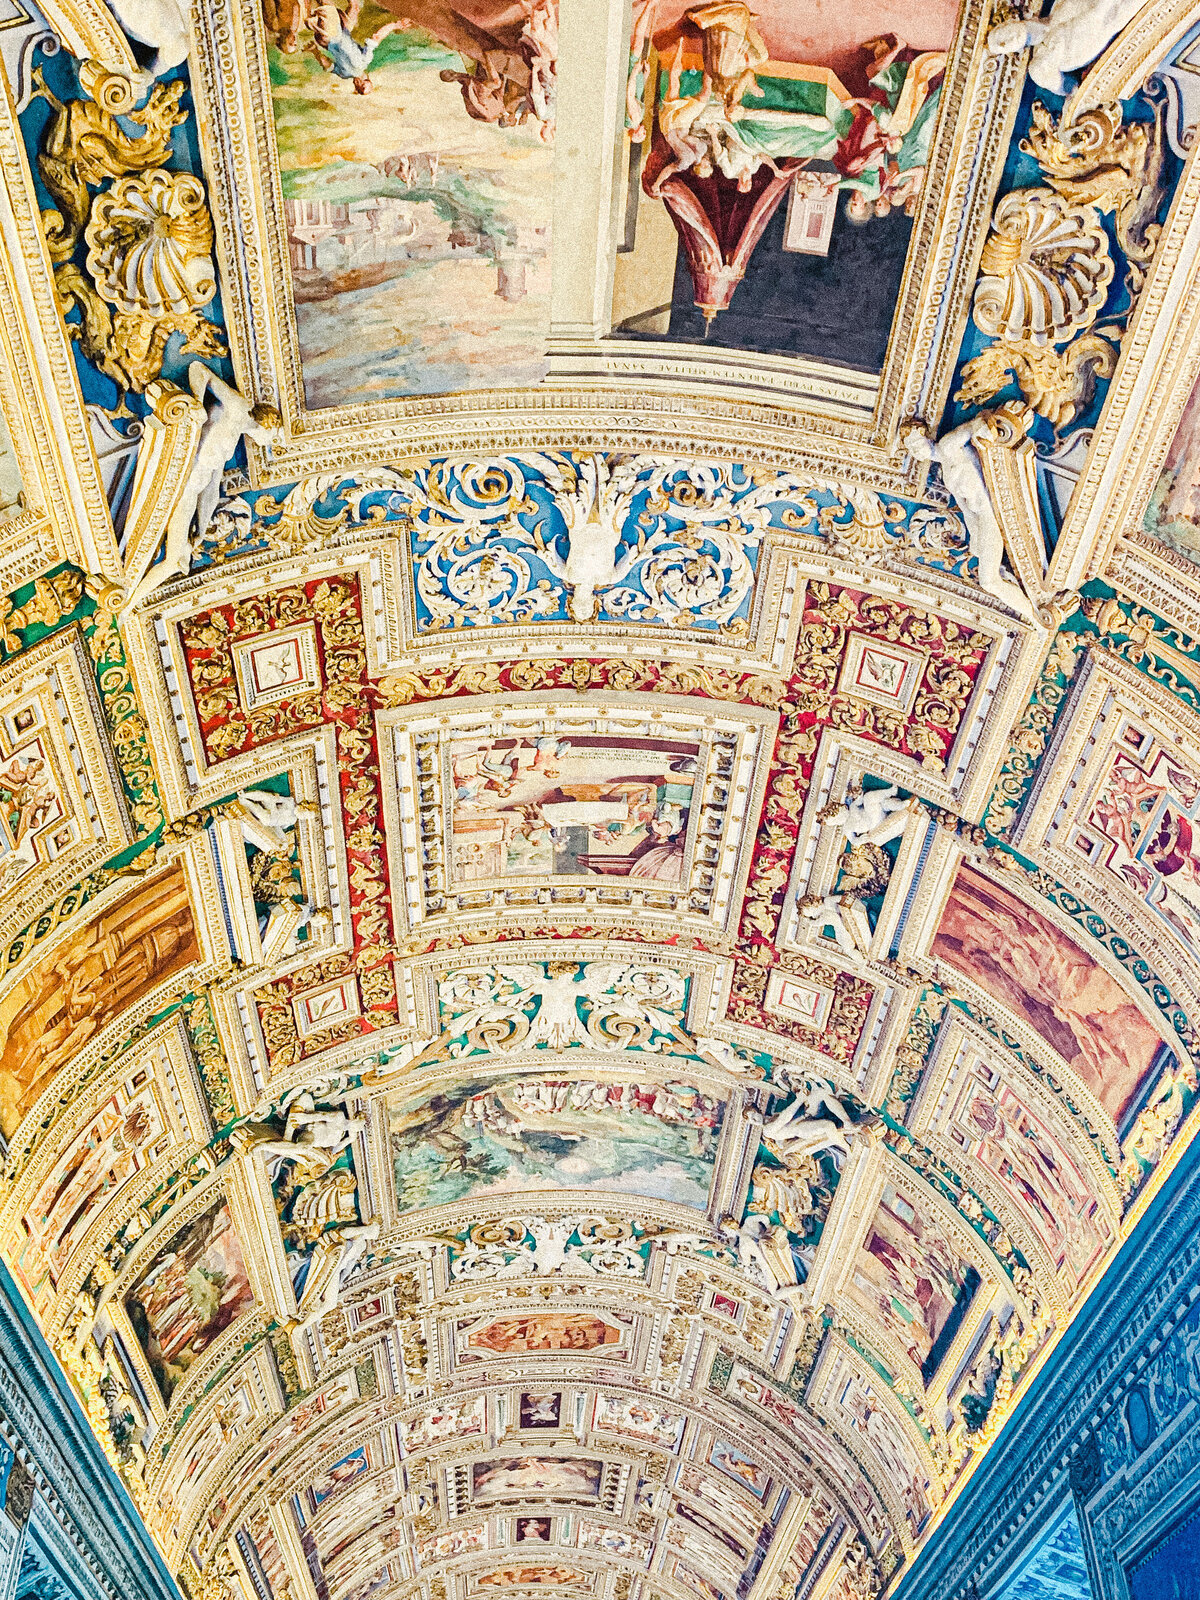 A fine art ceiling in Rome, Italy.